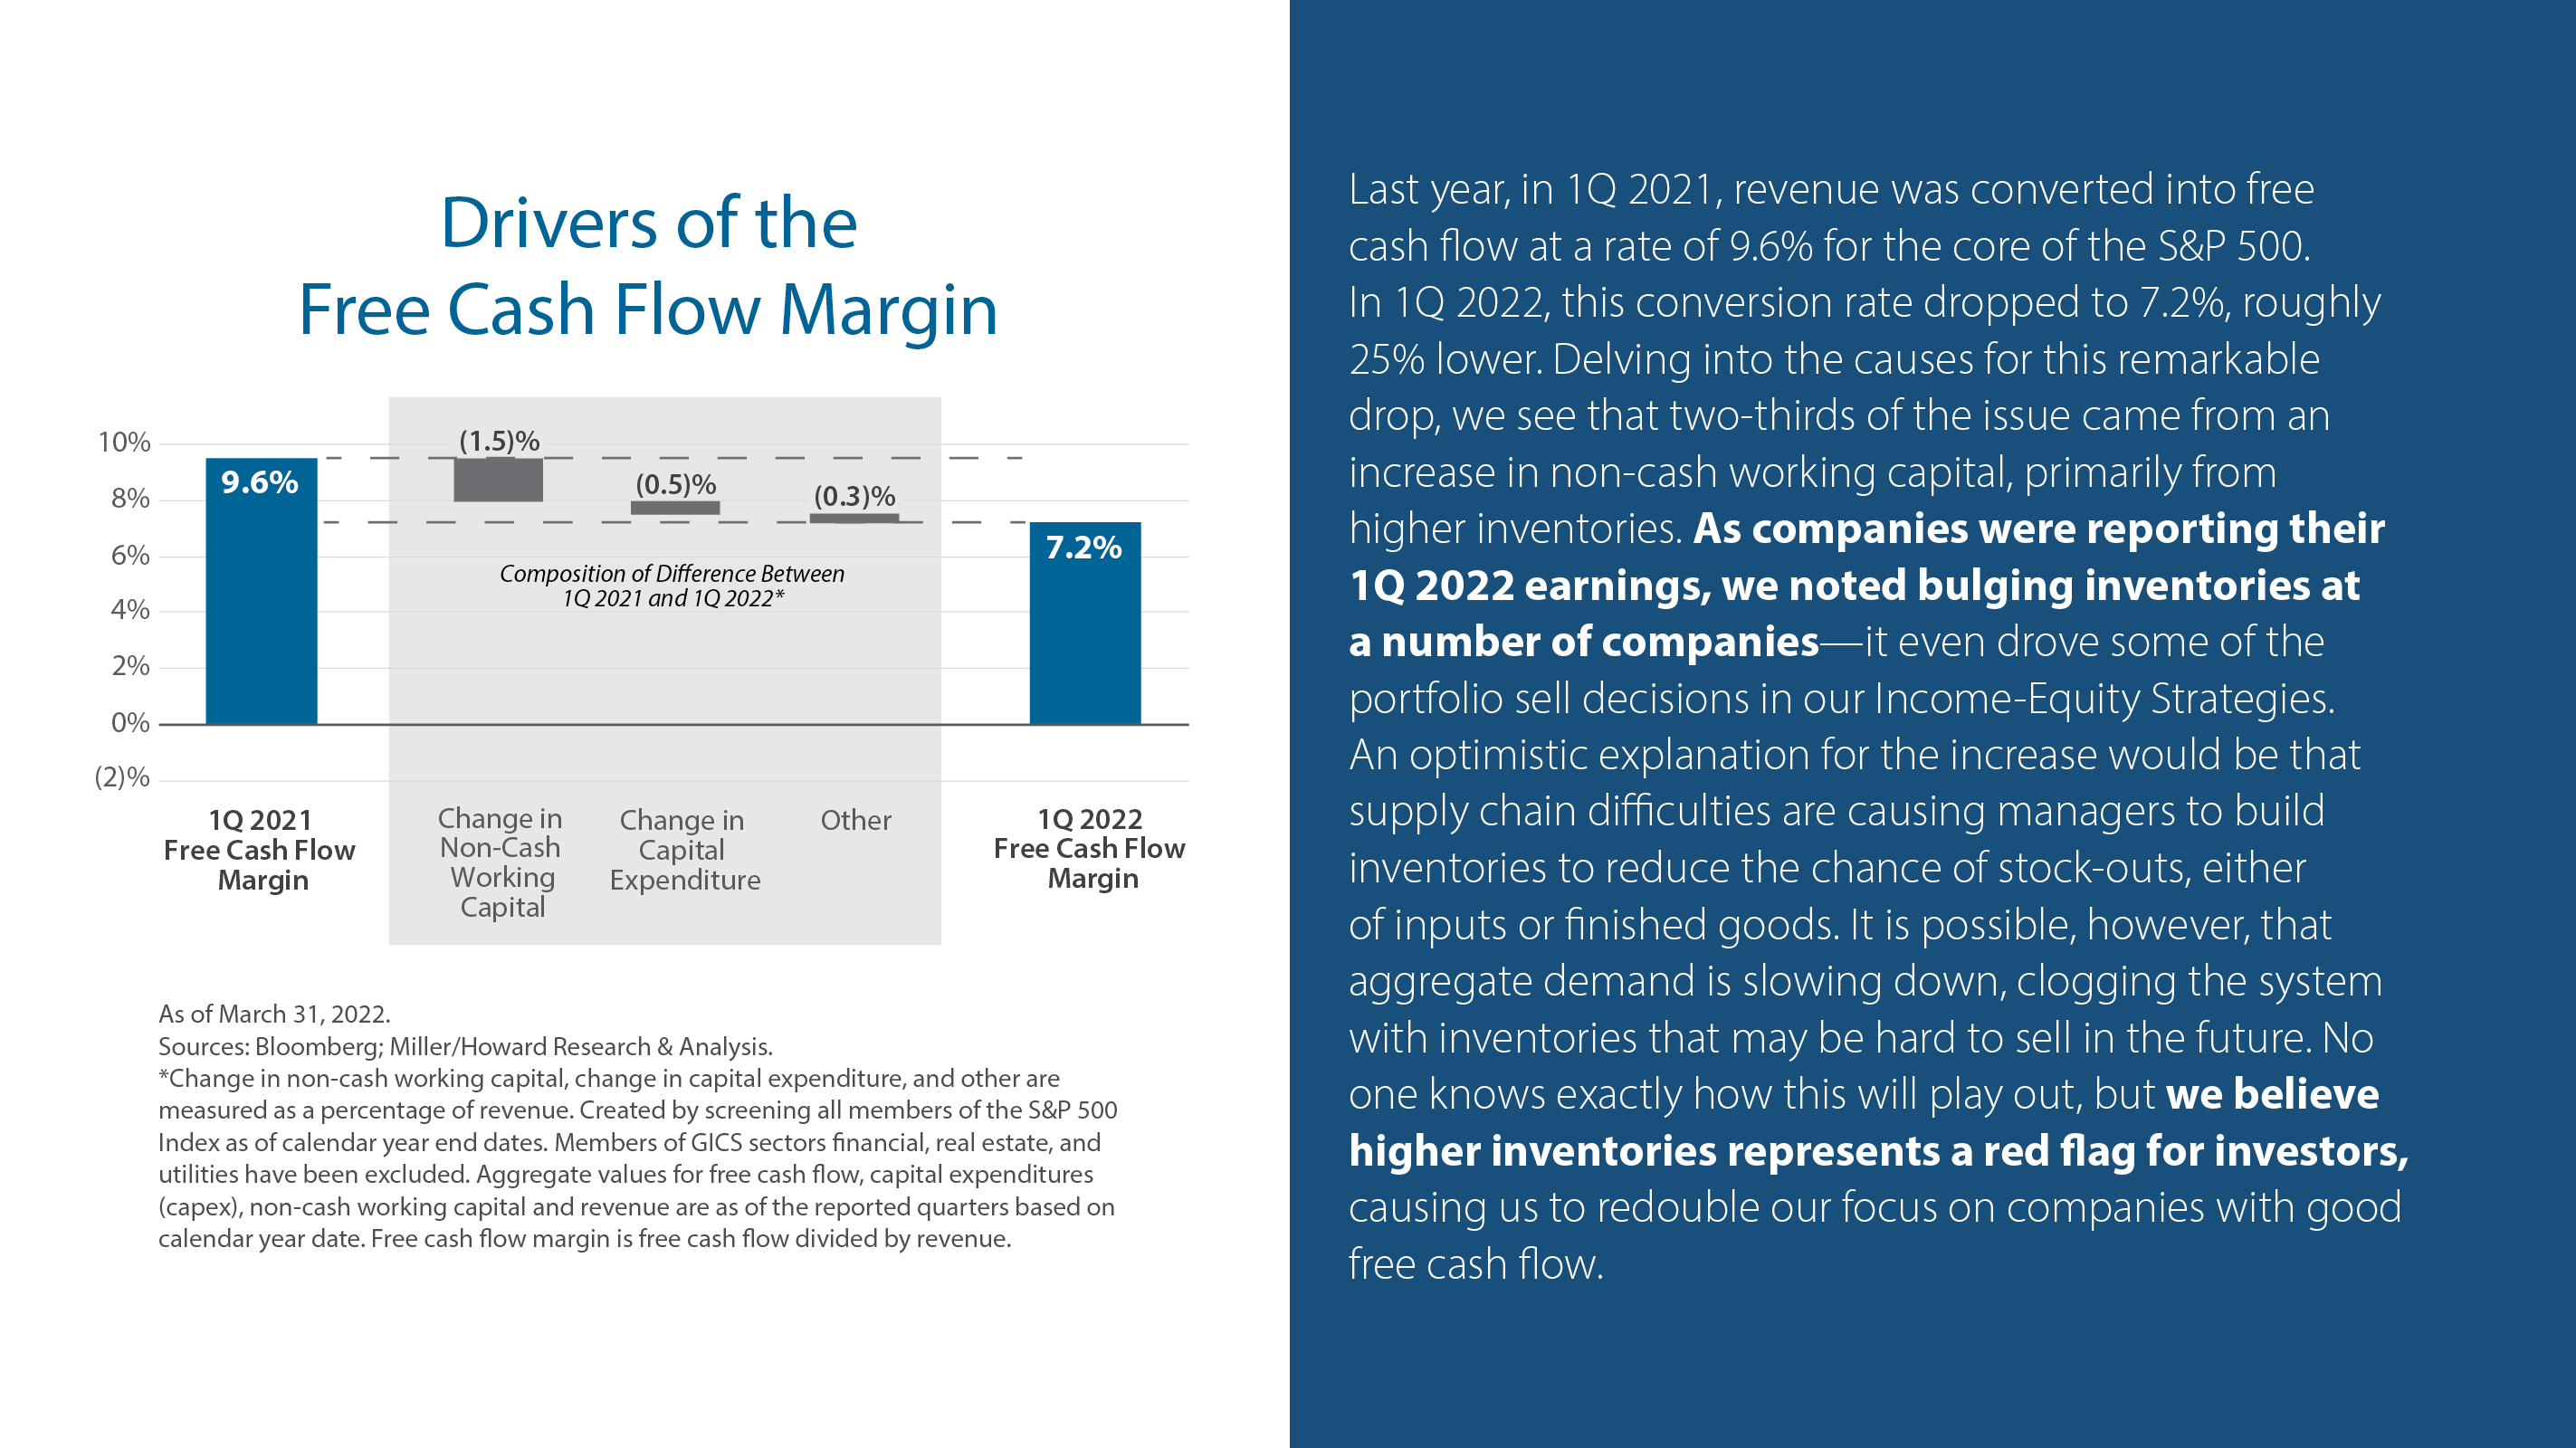 Drivers of the Free Cash Flow Margin